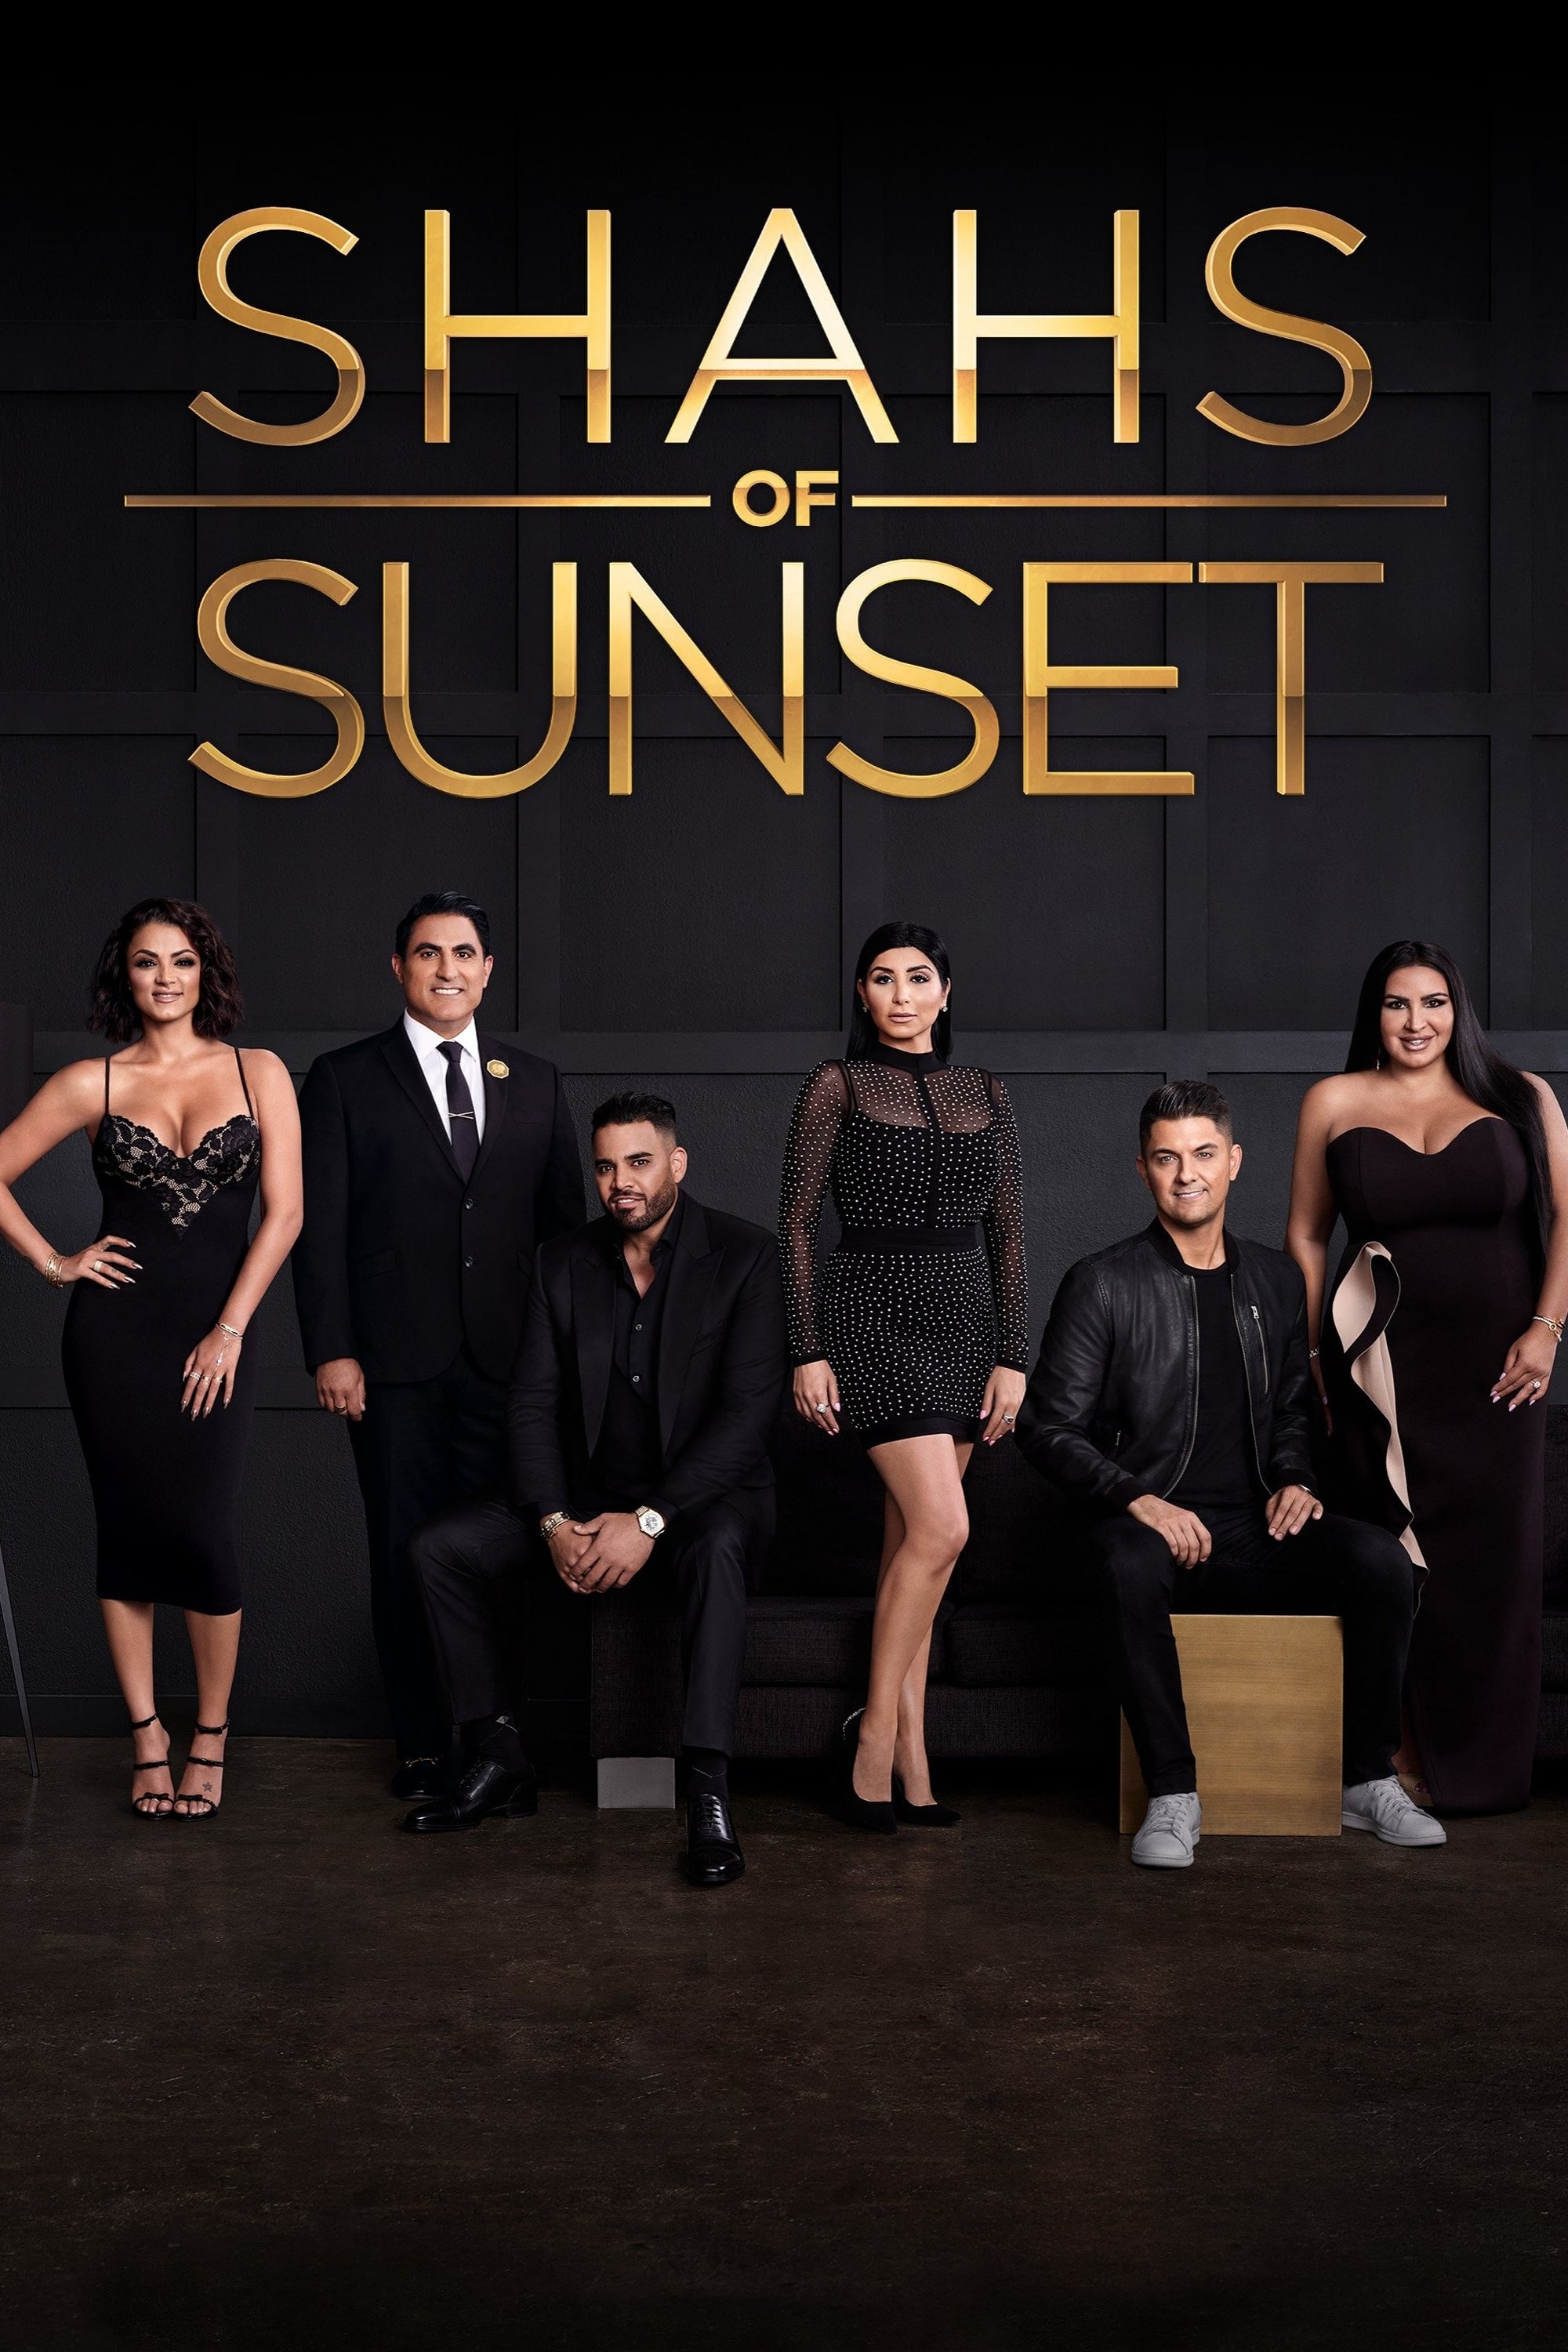 Shahs of Sunset TV Shows About Beverly Hills